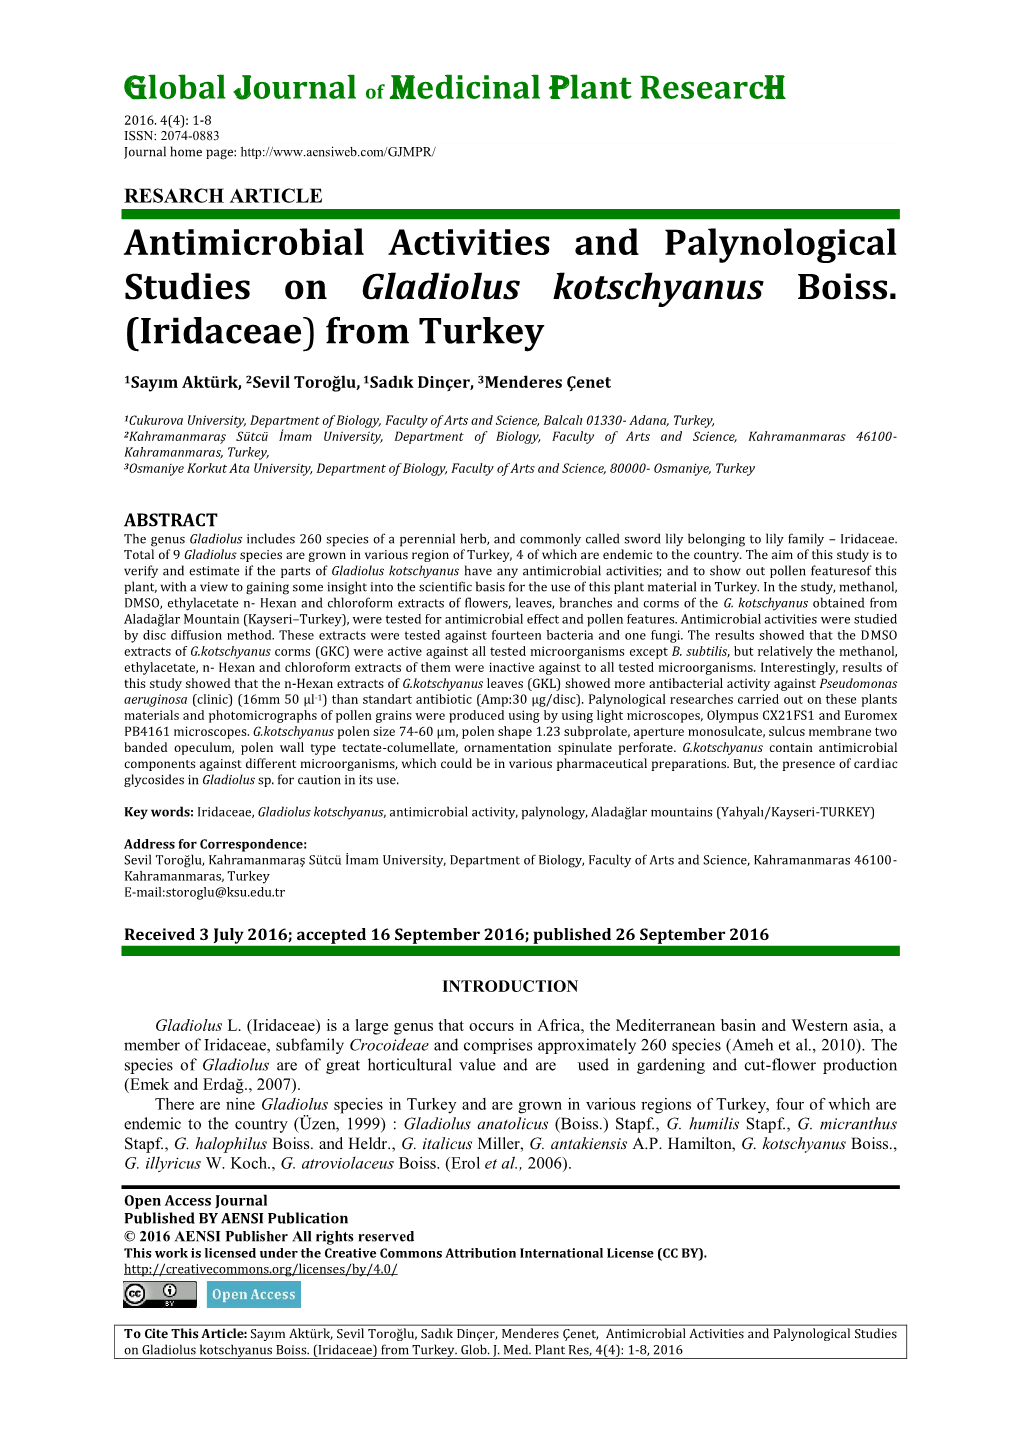 Antimicrobial Activities and Palynological Studies on Gladiolus Kotschyanus Boiss